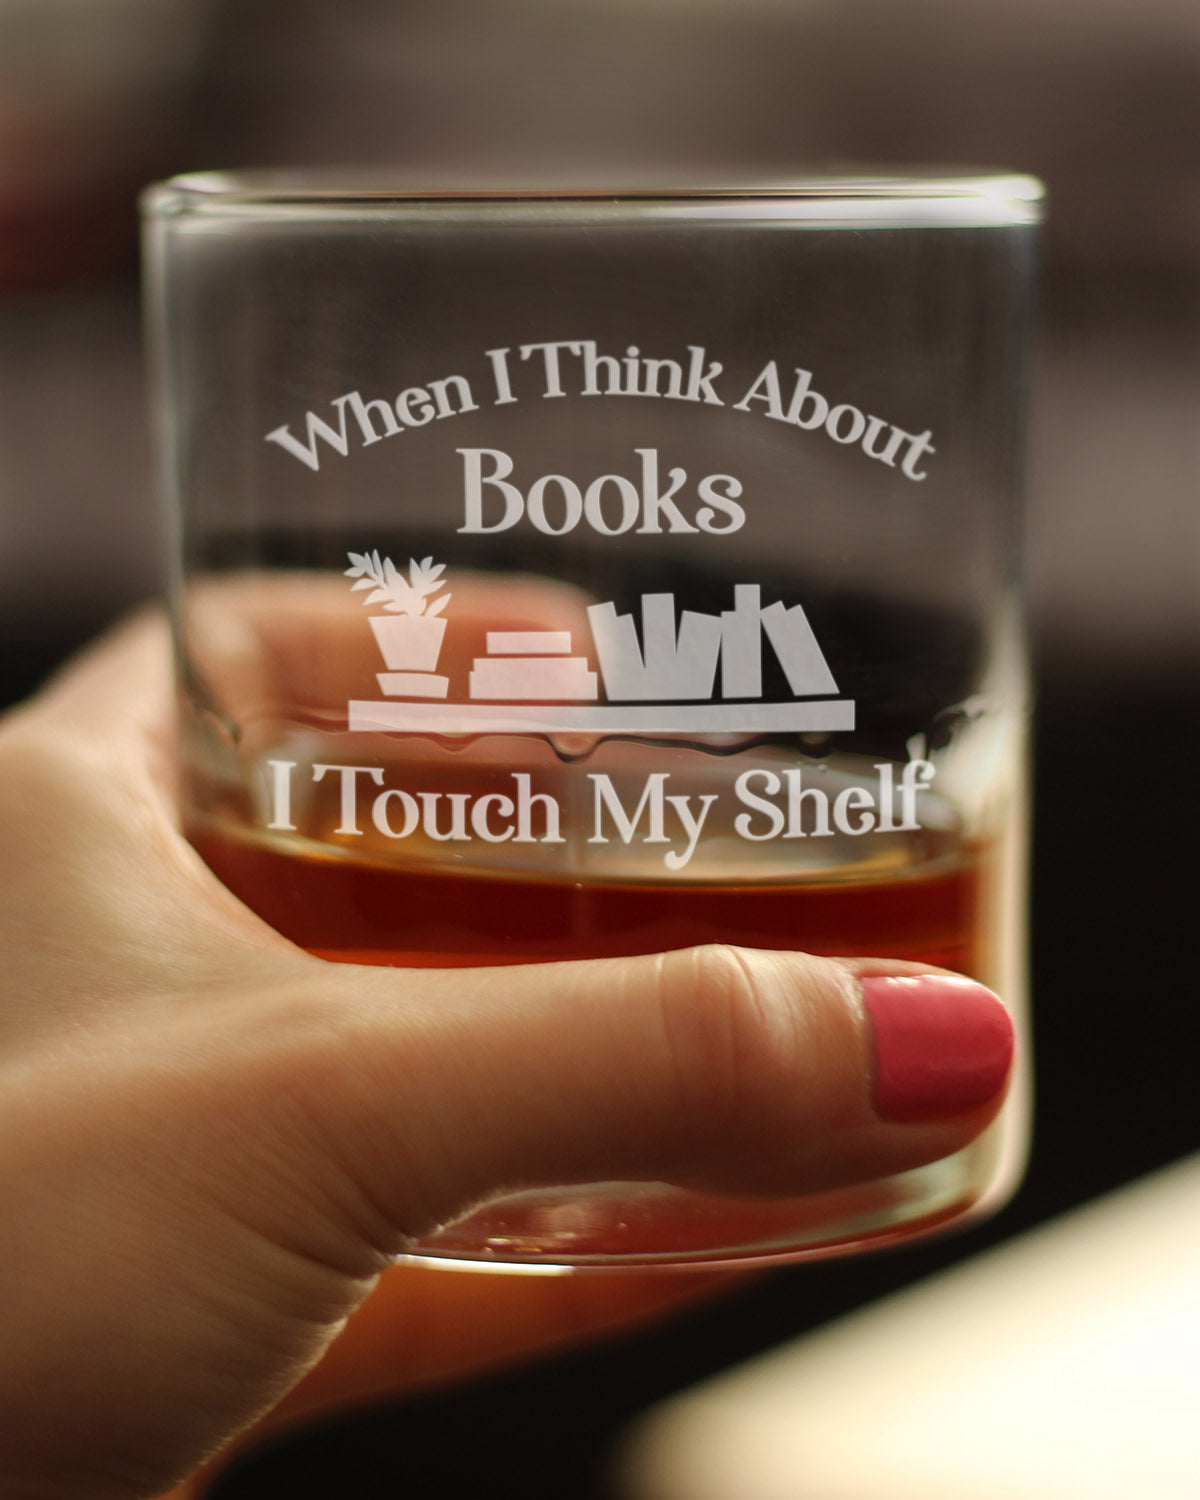 When I Think About Books I Touch My Shelf Whiskey Rocks Glass - Funny Book Club Gifts for Lovers of Reading &amp; Whisky